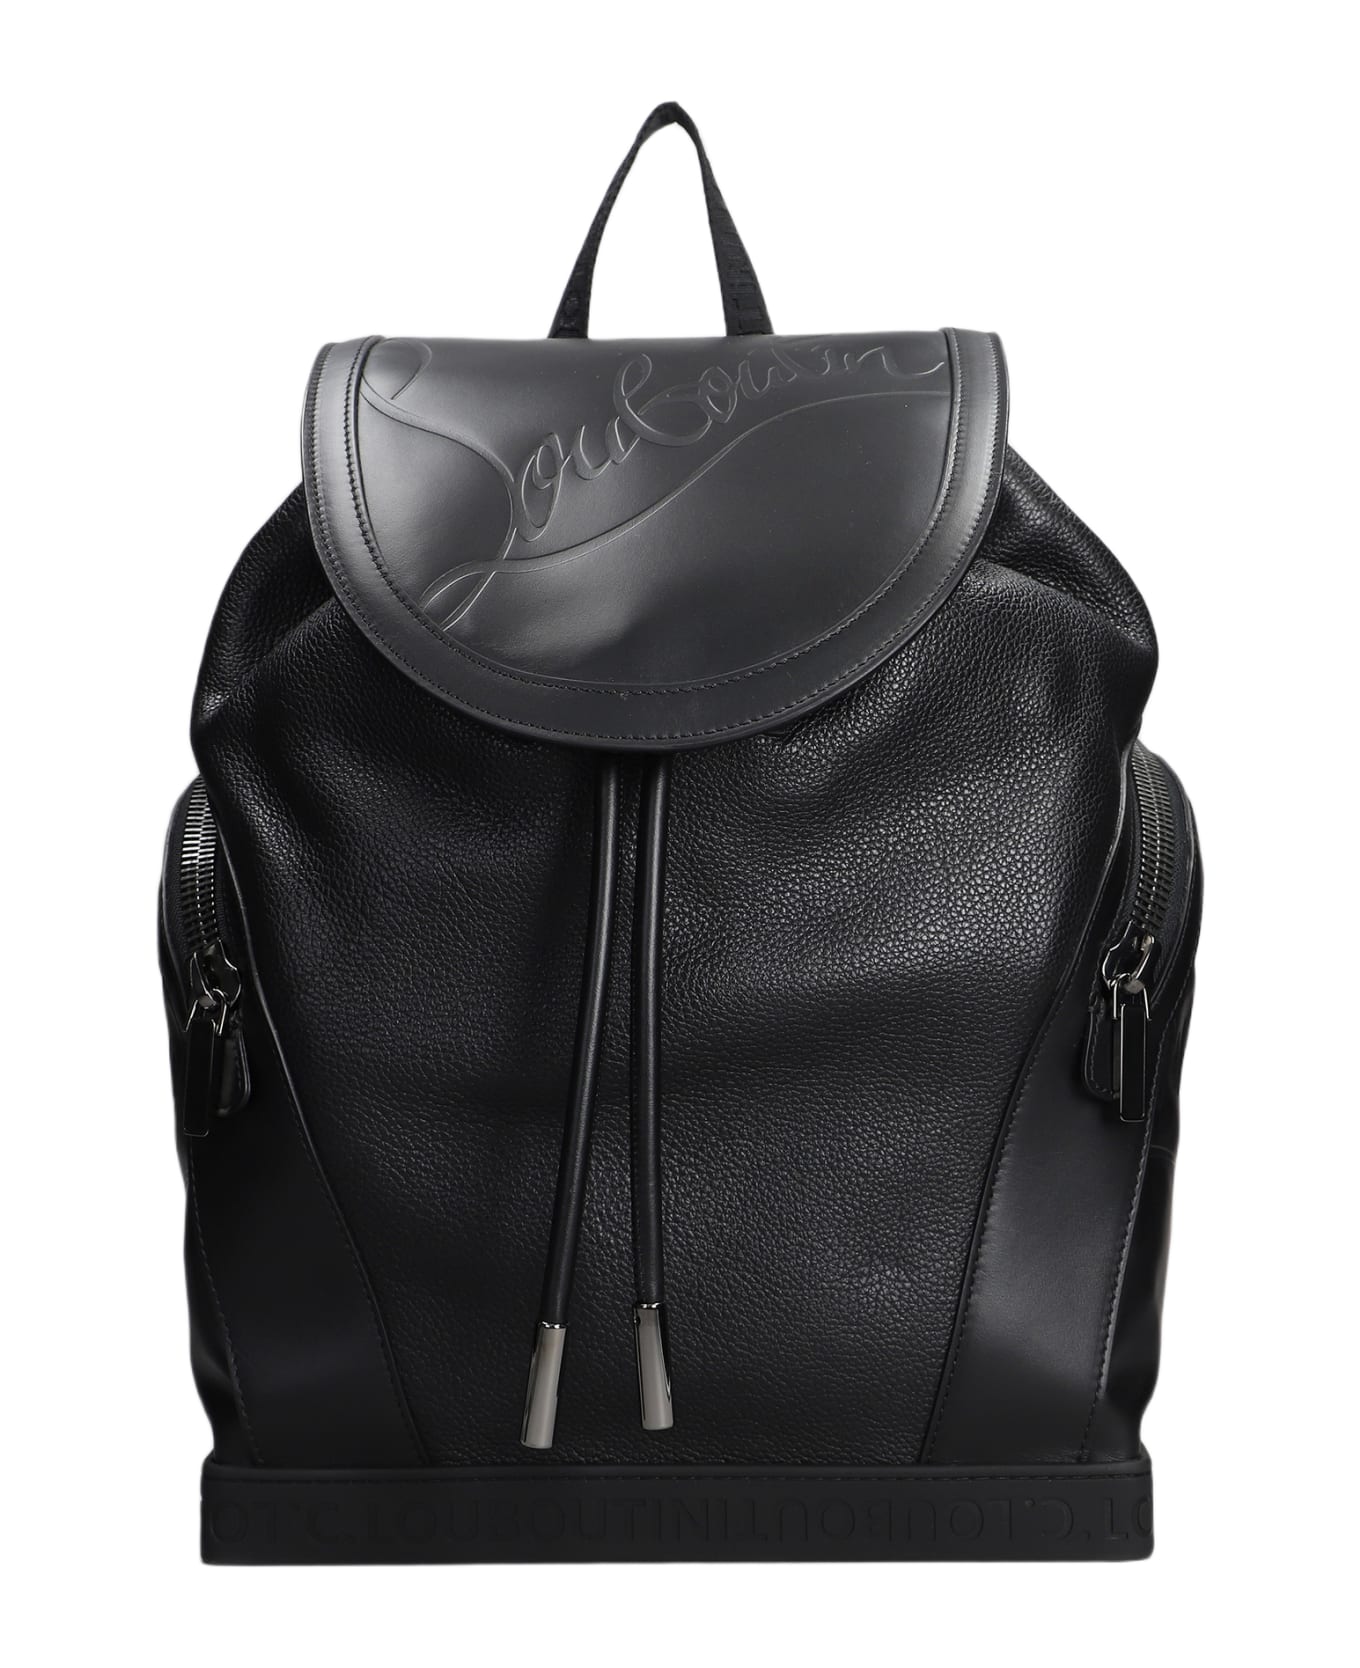 Christian Louboutin Explorafunk S Backpack In Black Leather - black バックパック